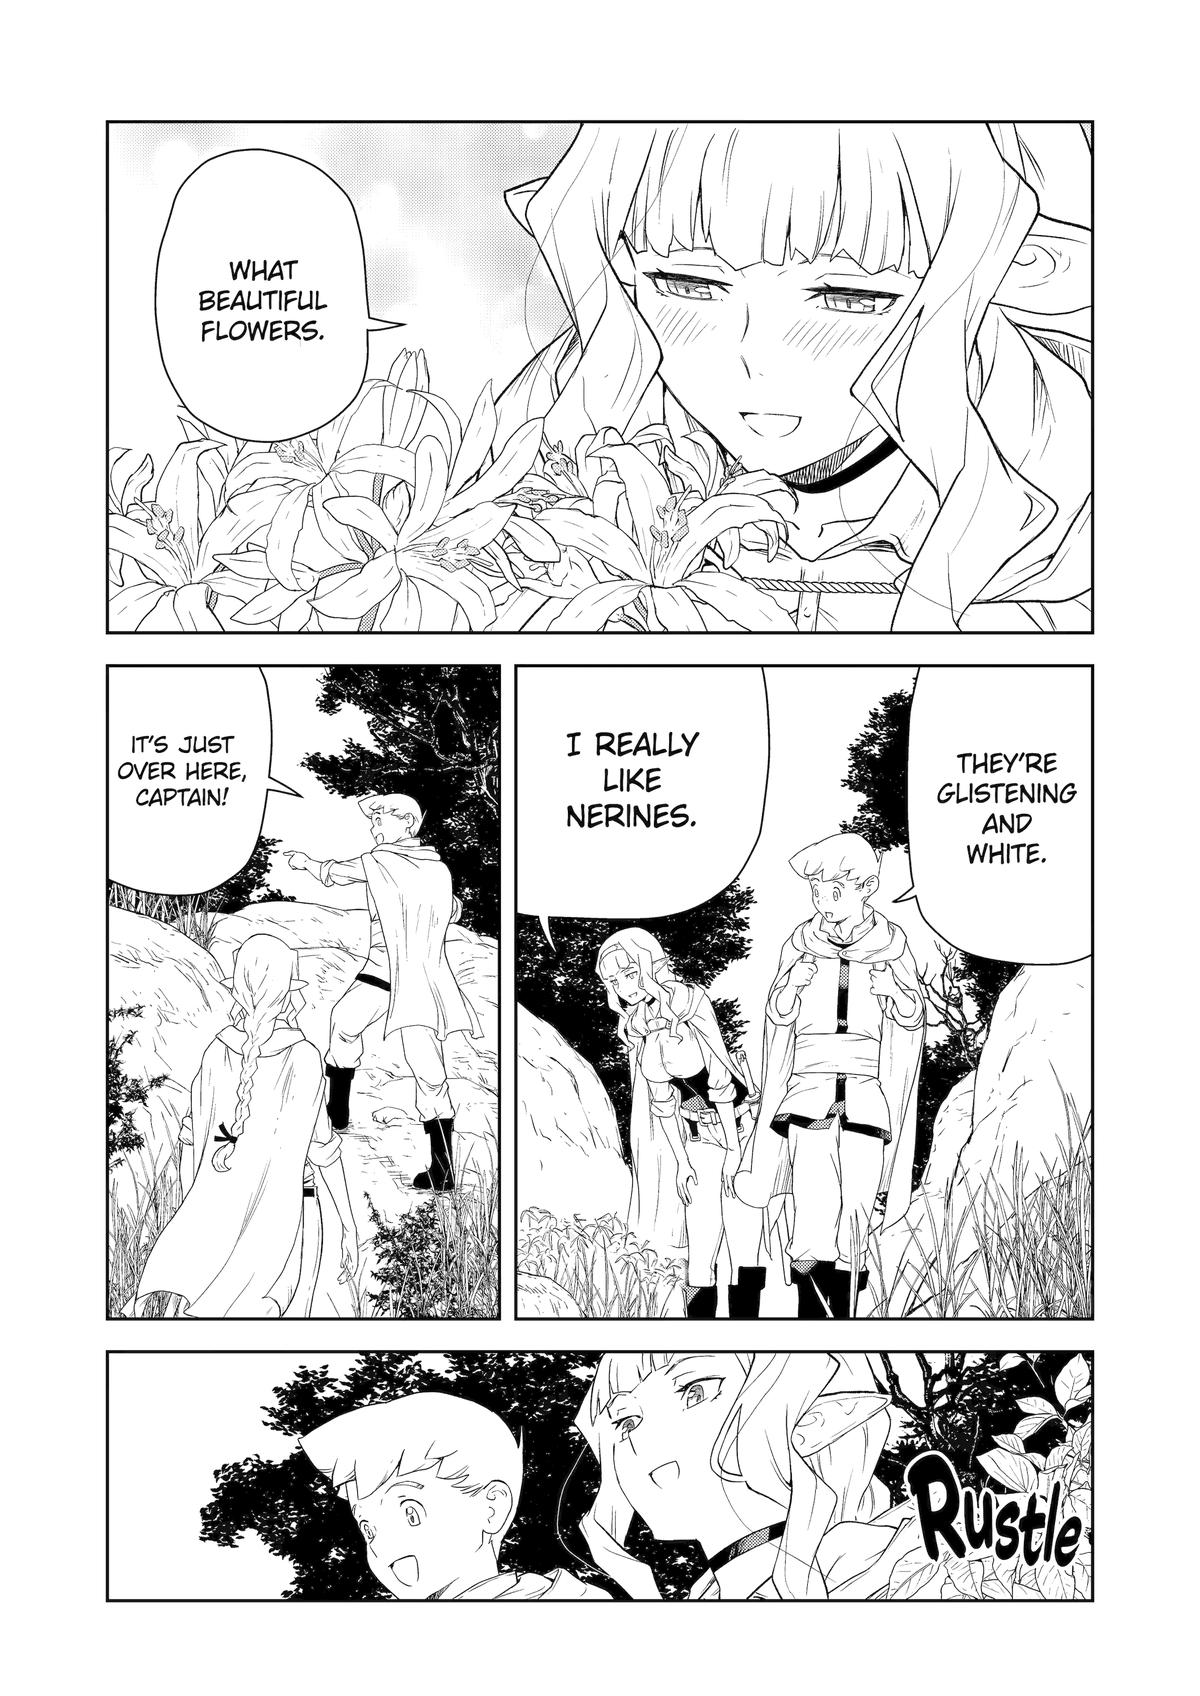 Even The Captain Knight, Miss Elf, Wants To Be A Maiden. - Page 1